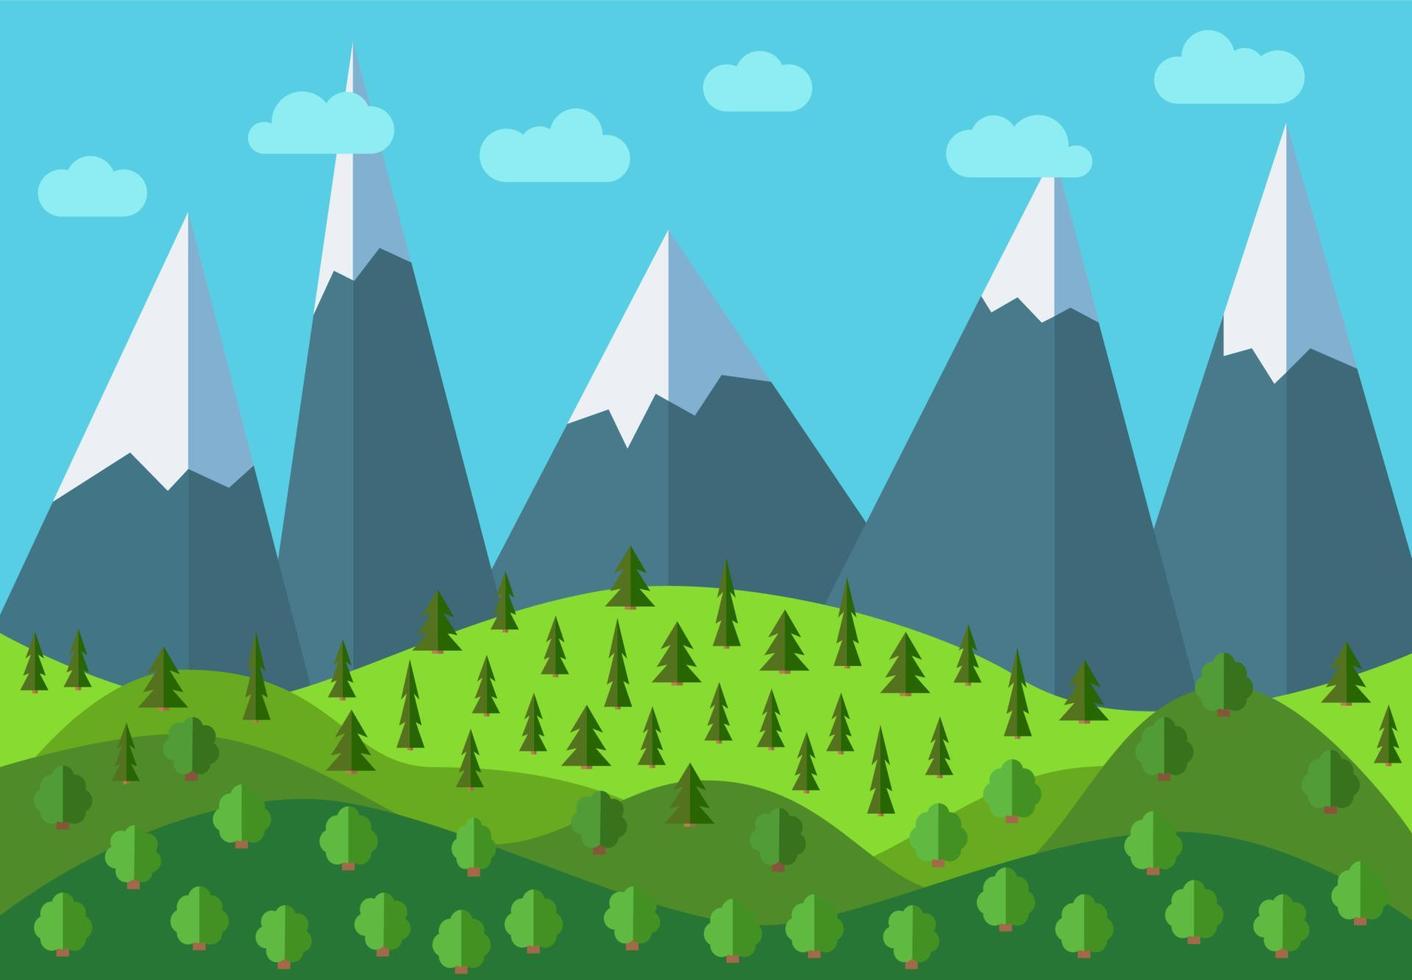 Vector panoramic mountain cartoon landscape. Natural landscape in the flat style with blue sky, clouds, trees, hills and mountains with snow on the peaks.